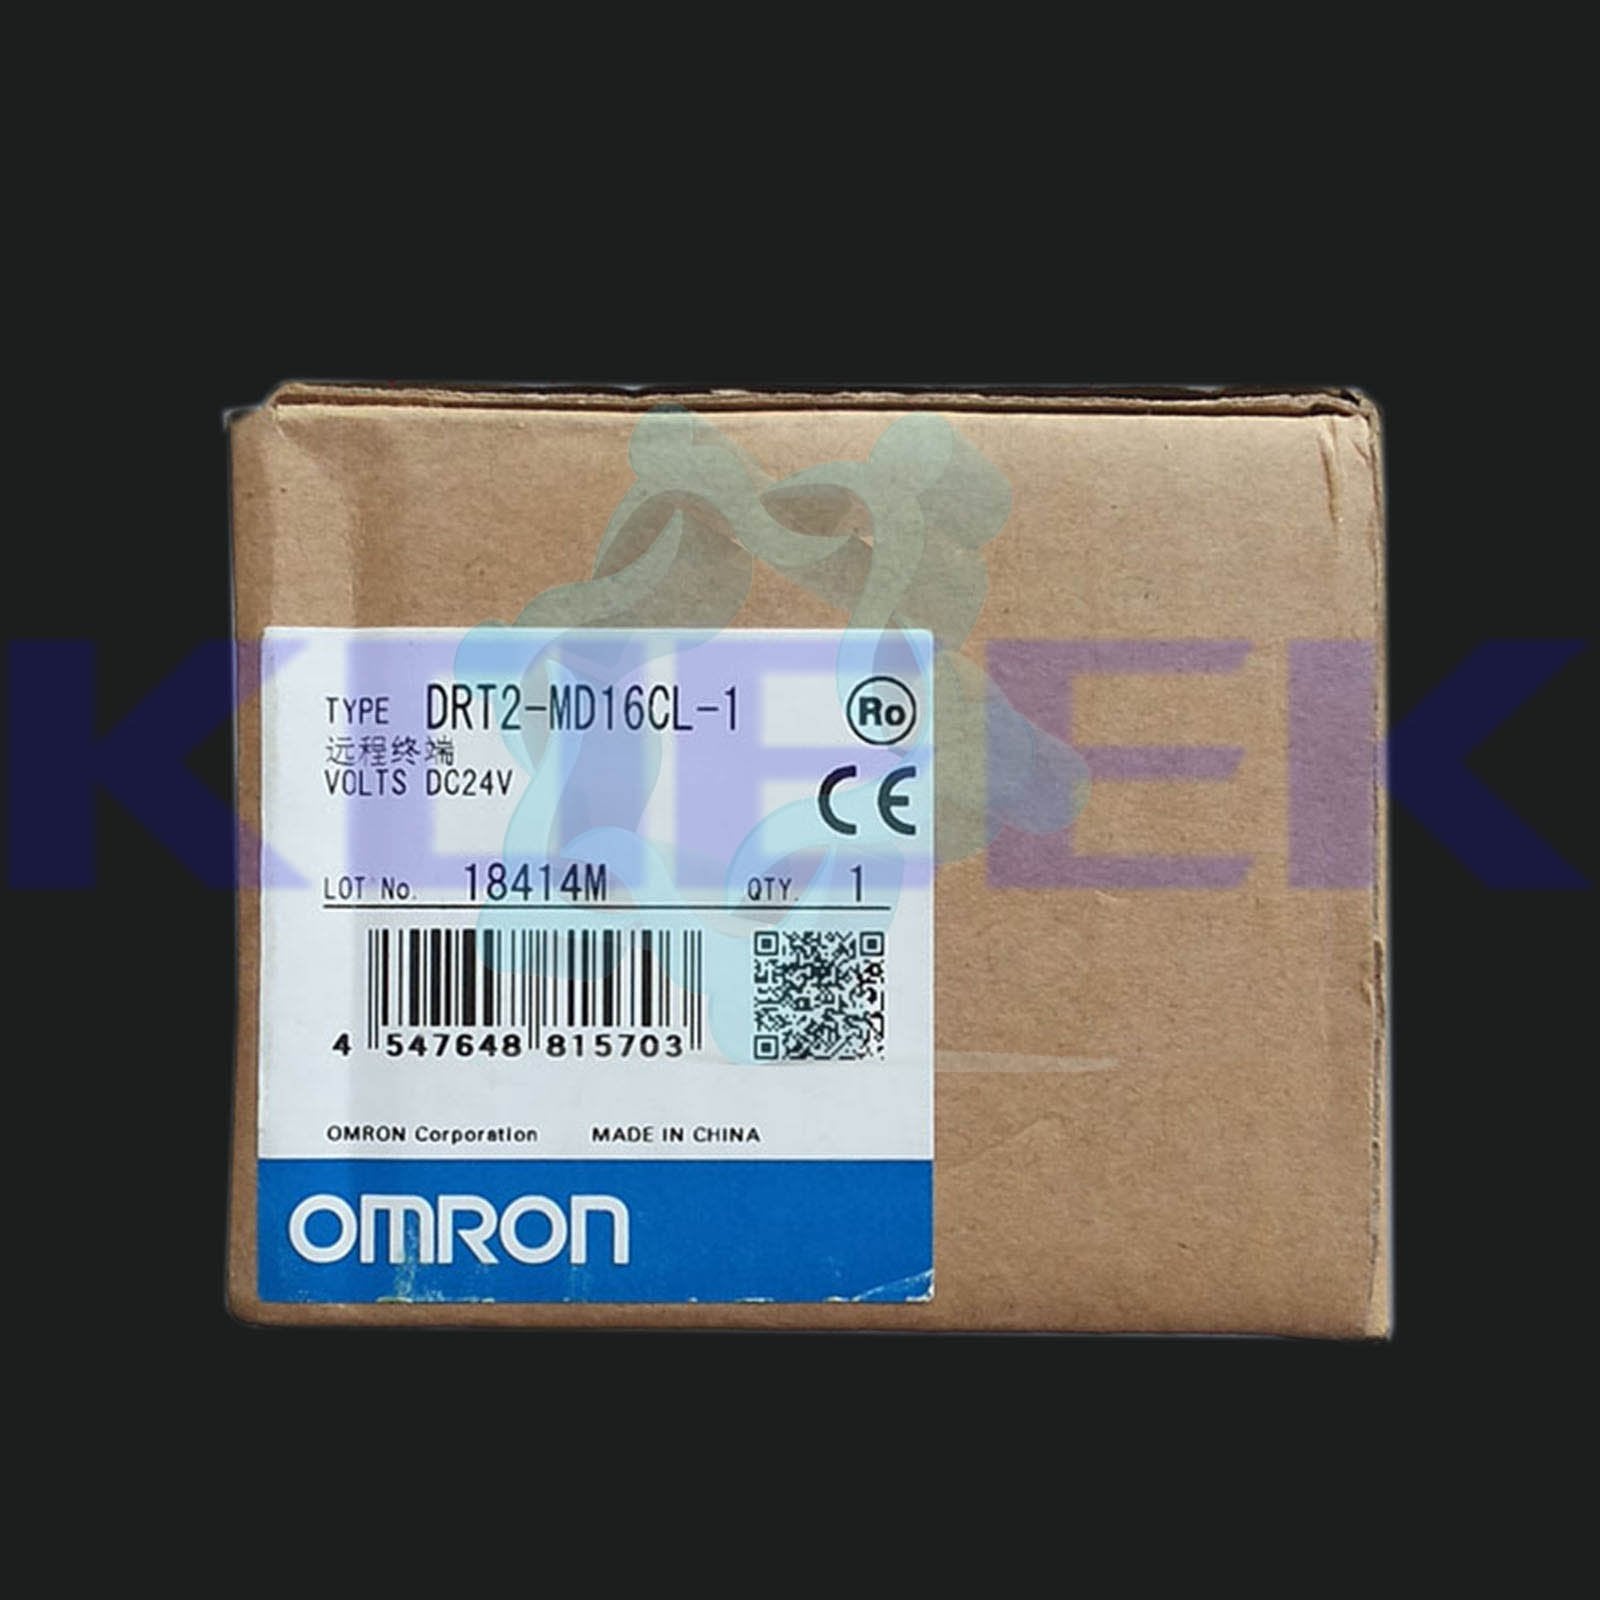 DRT2-HD16C-1 KOEED 500+, 90%, import_2020_10_10_031751, Omron, Other